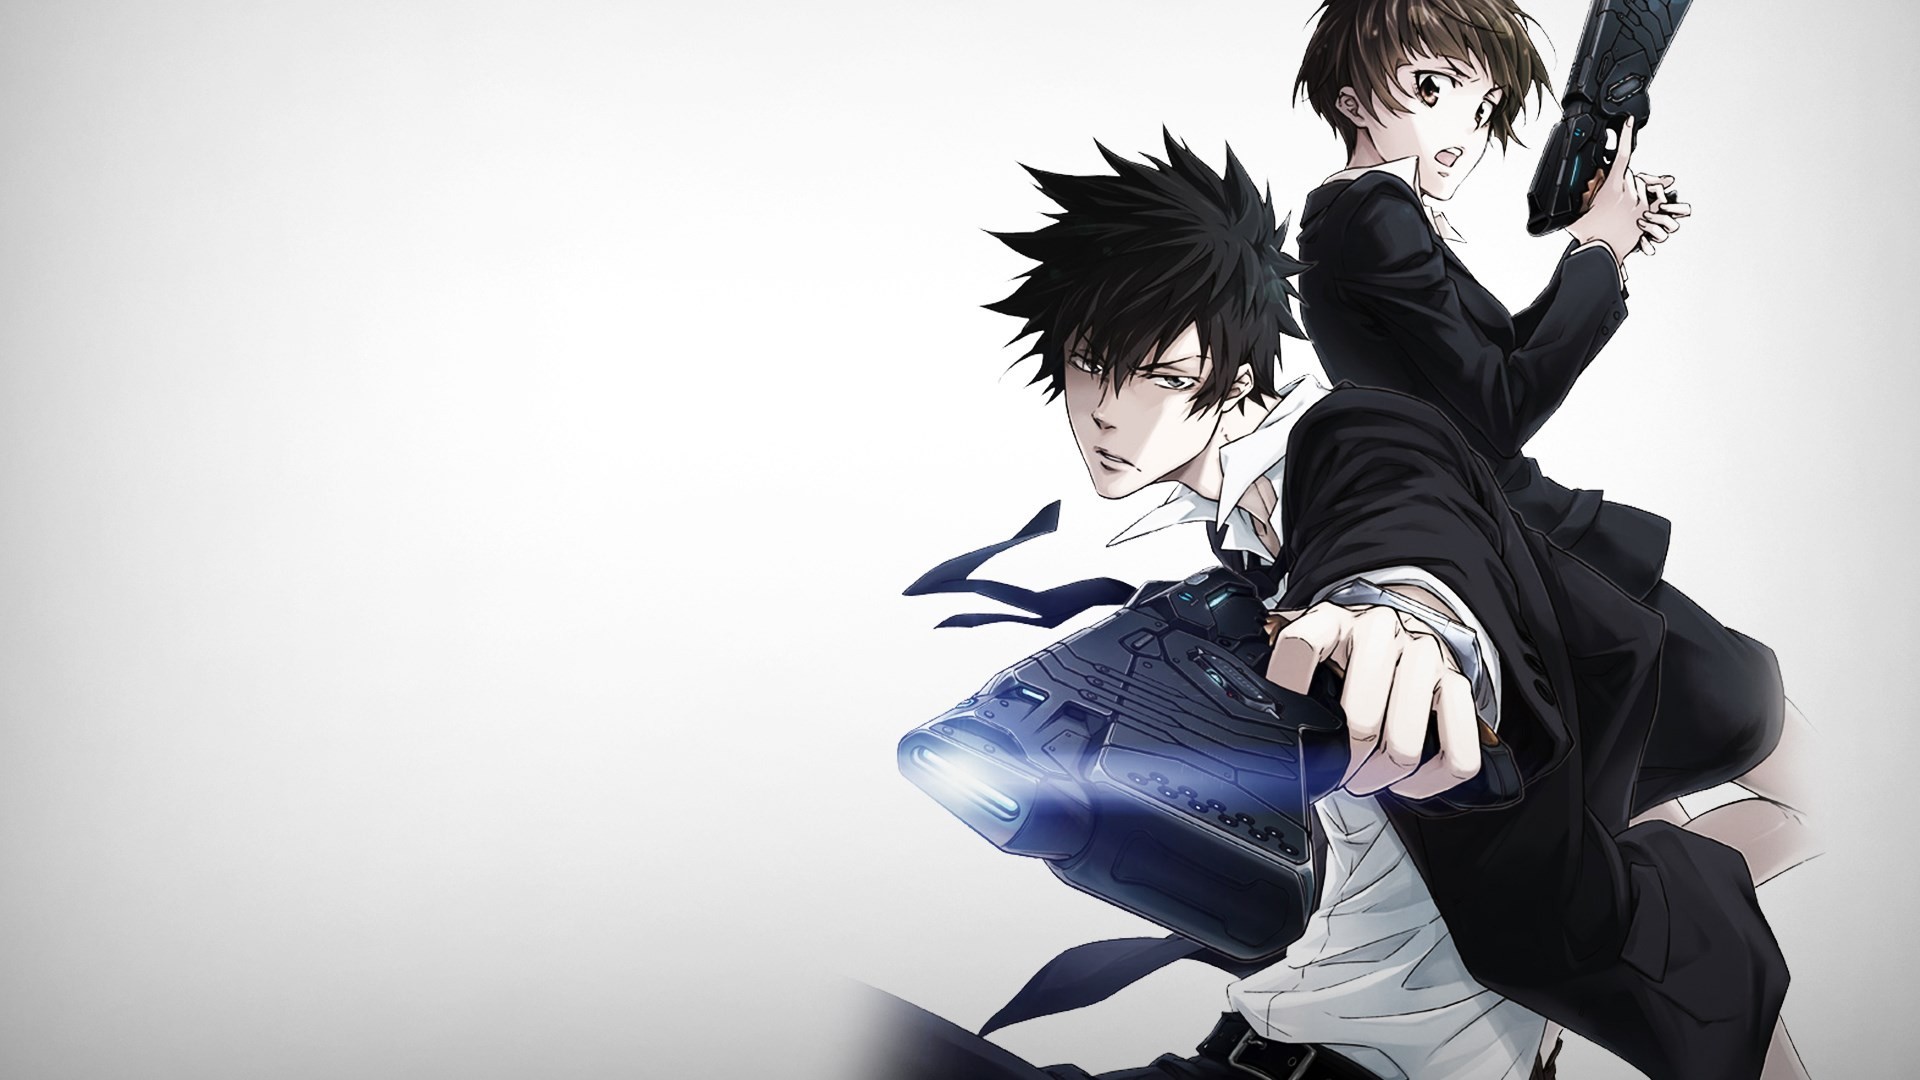 1920x1080  #1956995, psycho pass category - Backgrounds In High Quality -  psycho pass image